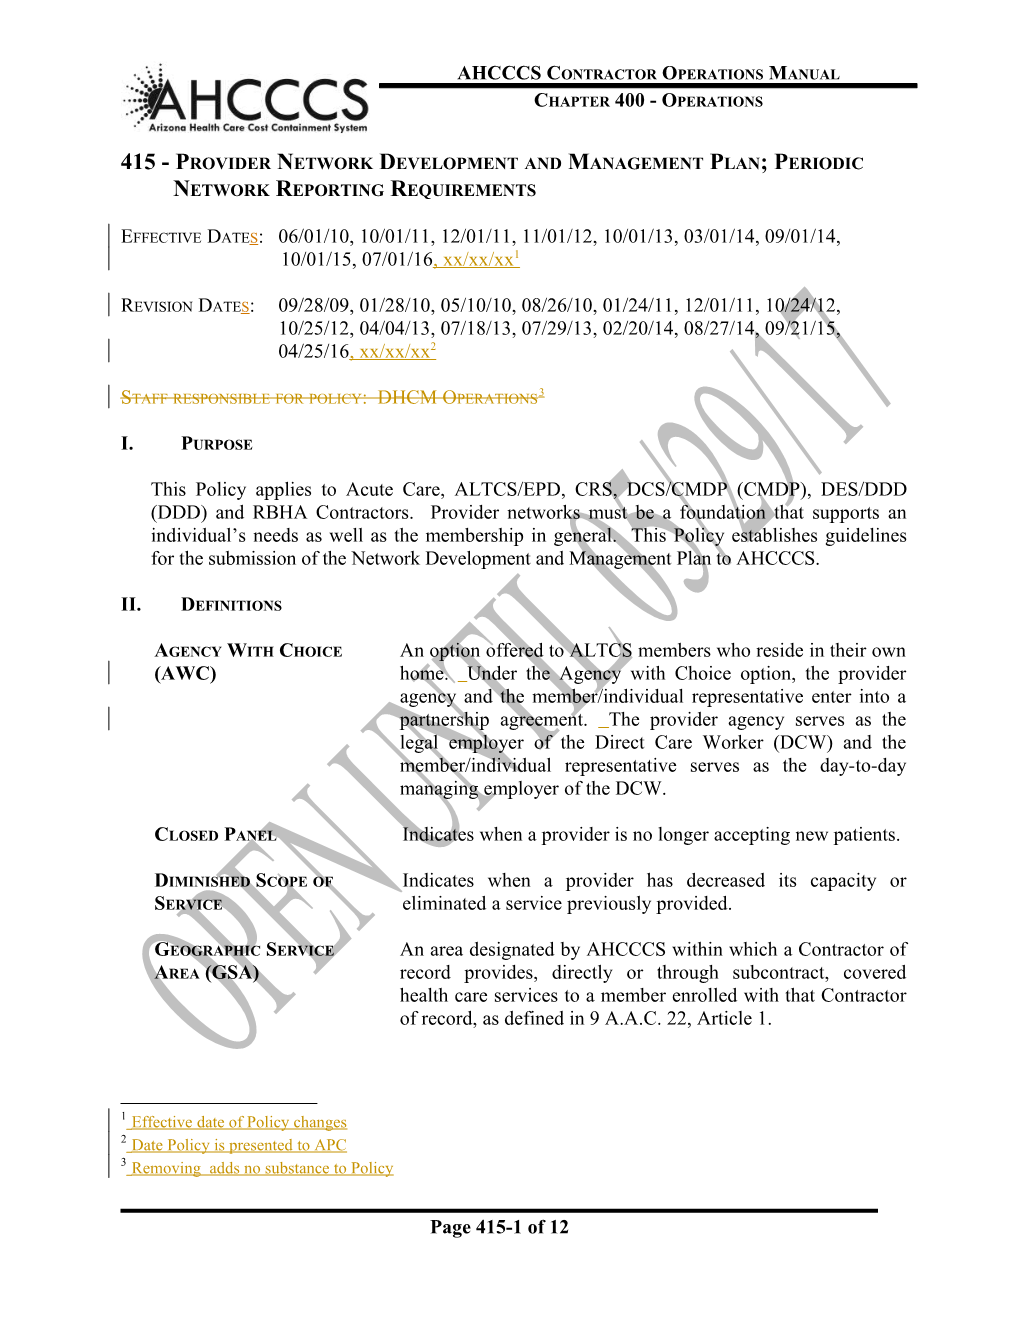 415 - Provider Network Development and Management Plan;Periodic Network Reporting Requirements